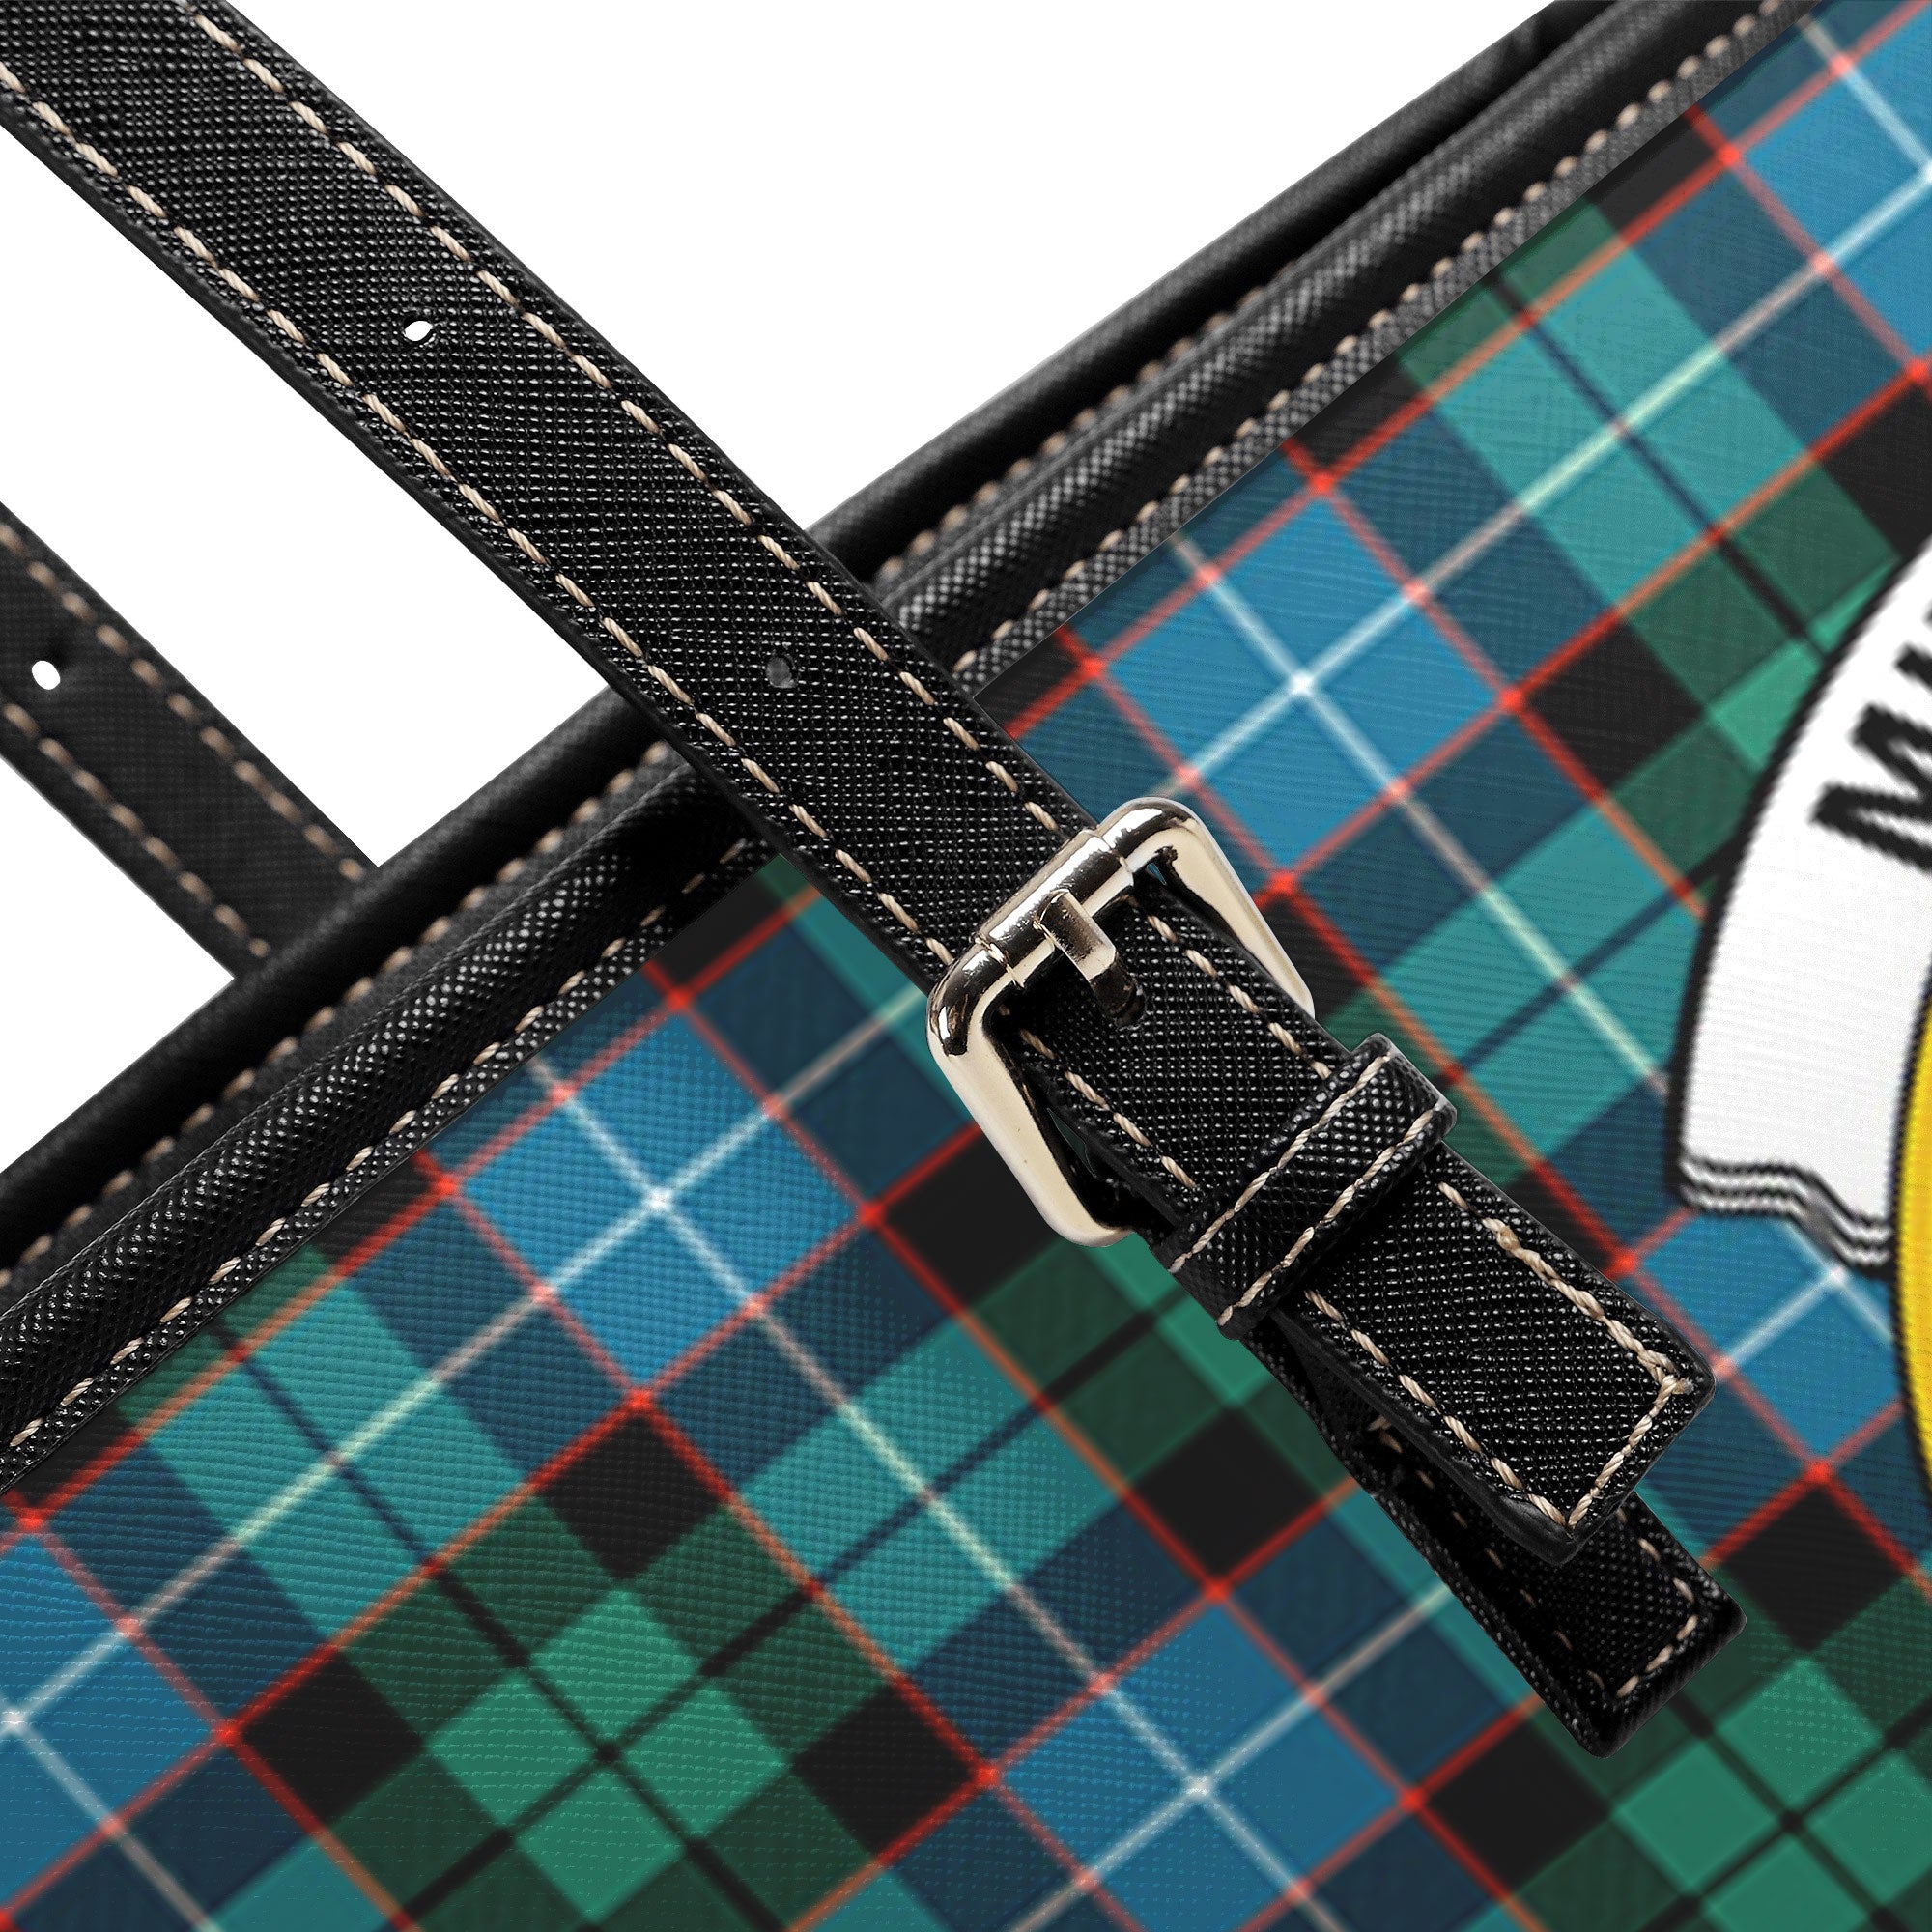 Mitchell Ancient Tartan Crest Leather Tote Bag